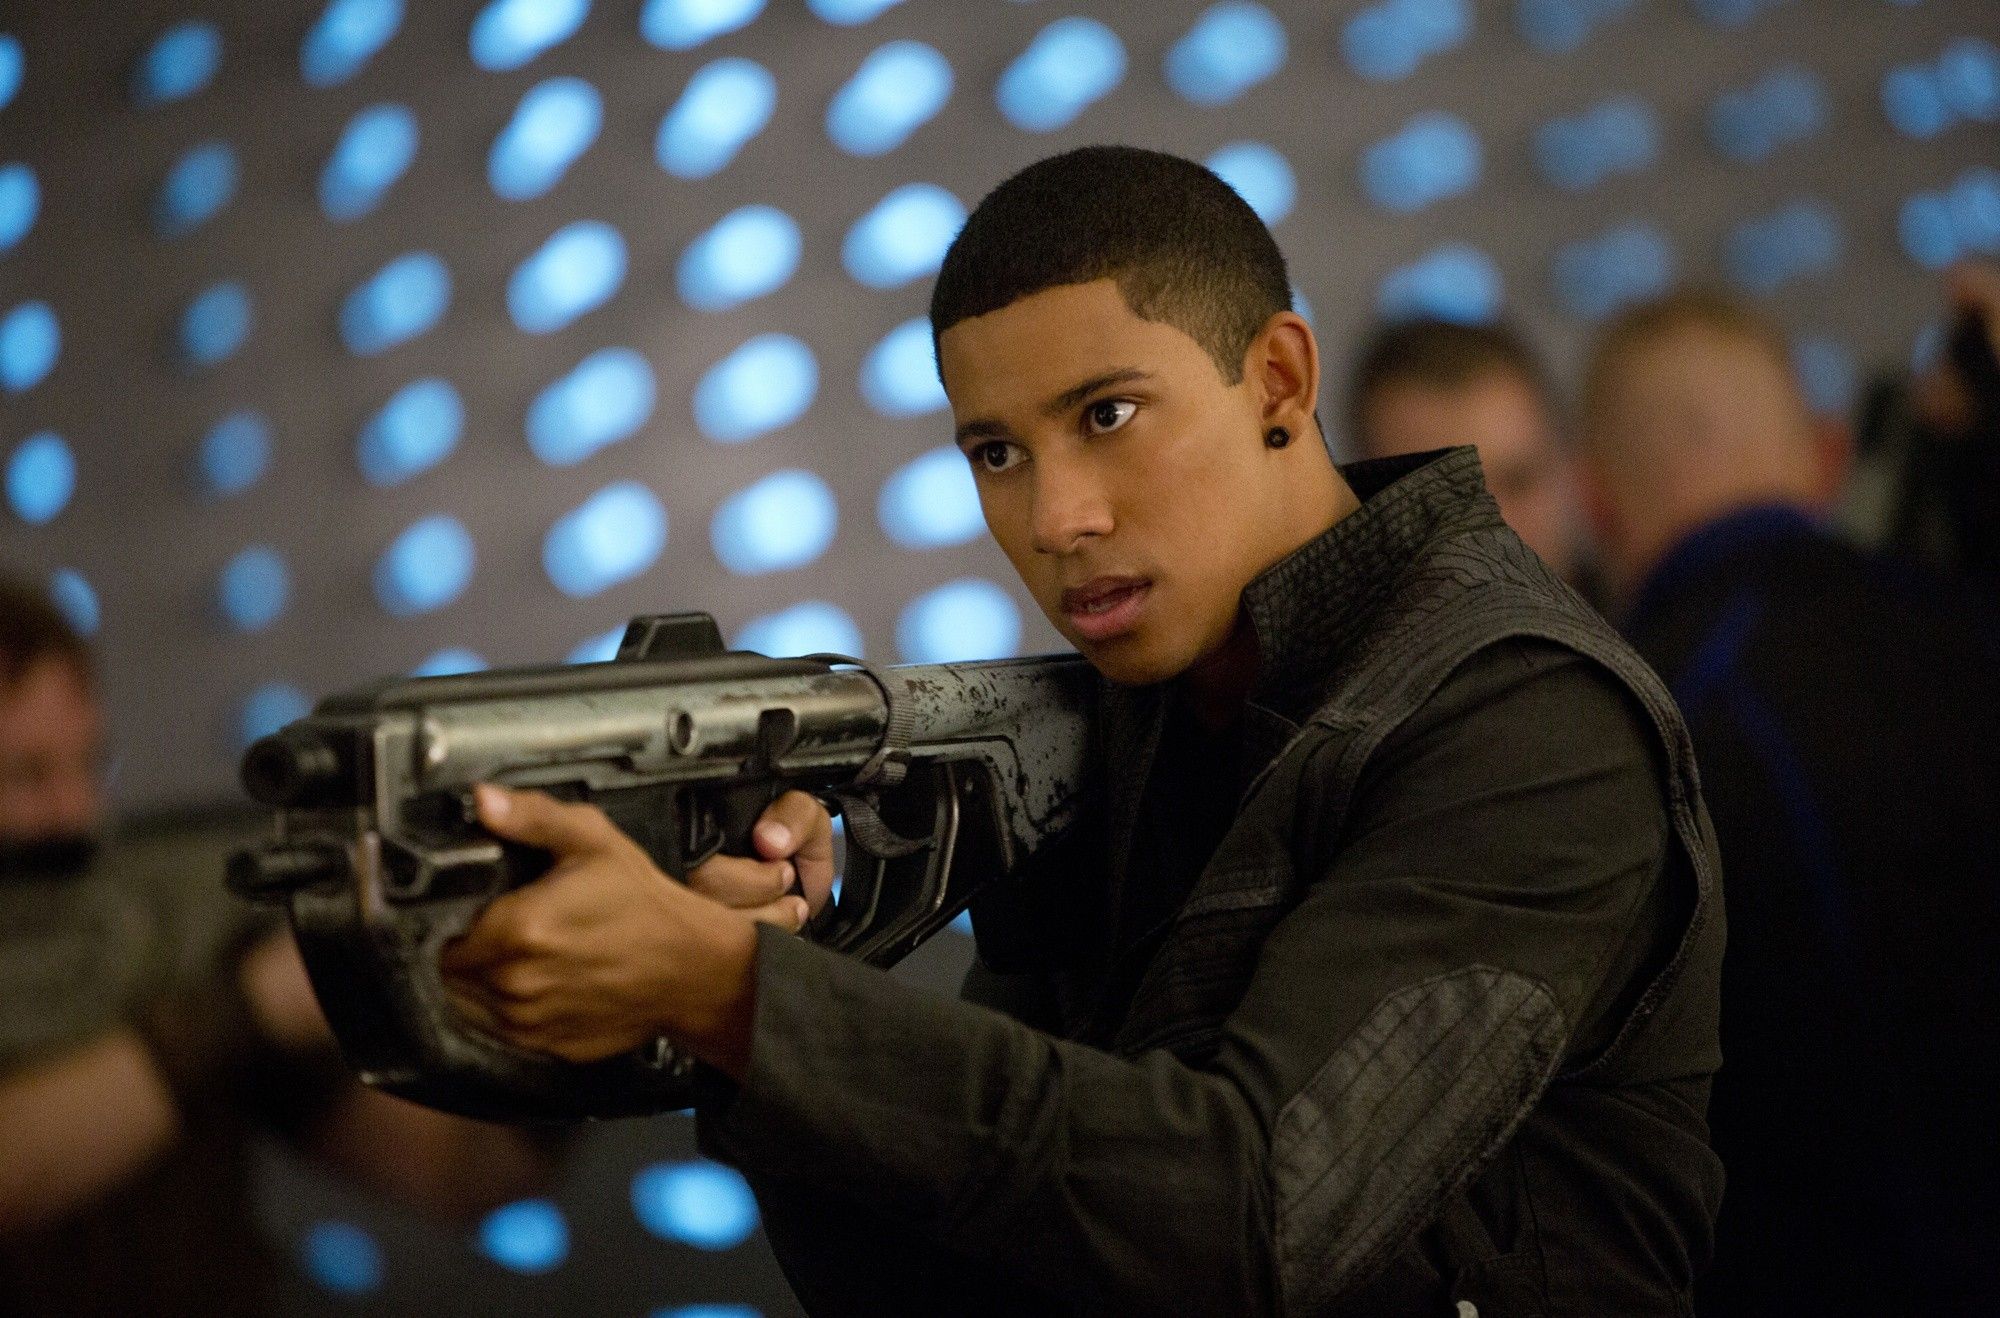 Keiynan Lonsdale stars as Uriah in Summit Entertainment's The Divergent Series: Insurgent (2015)